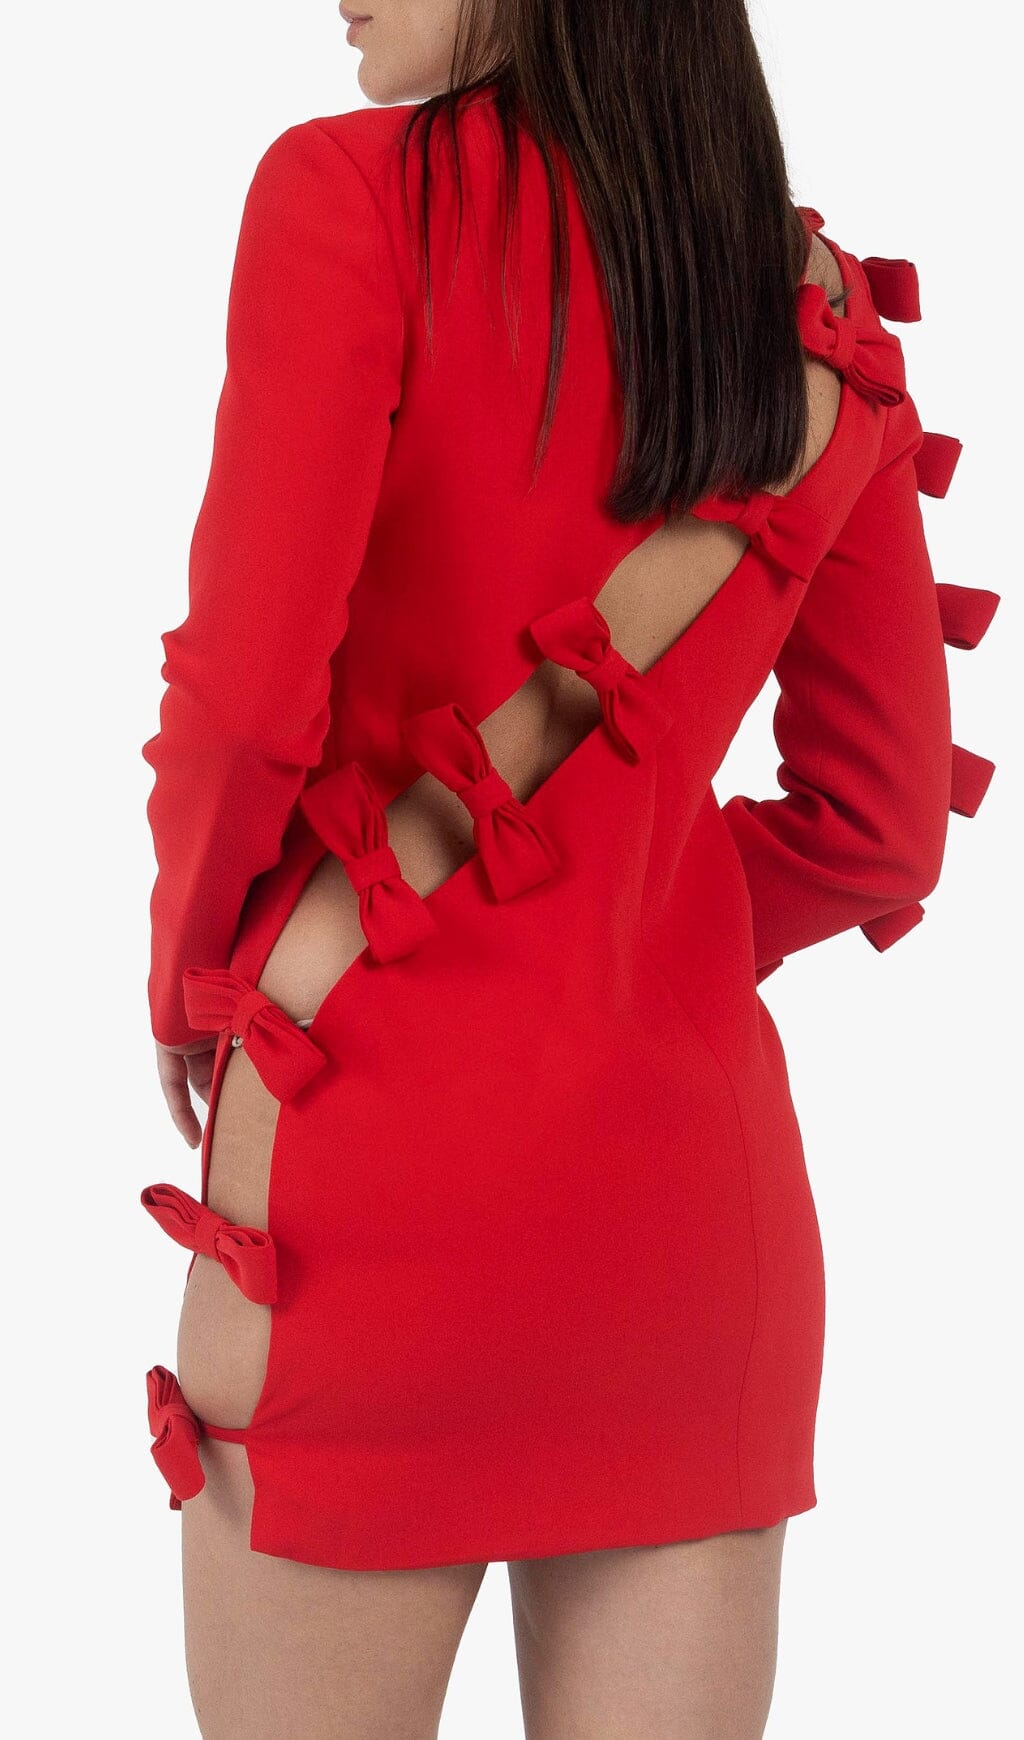 SIDE LACE UP BOW MINI DRESS IN RED